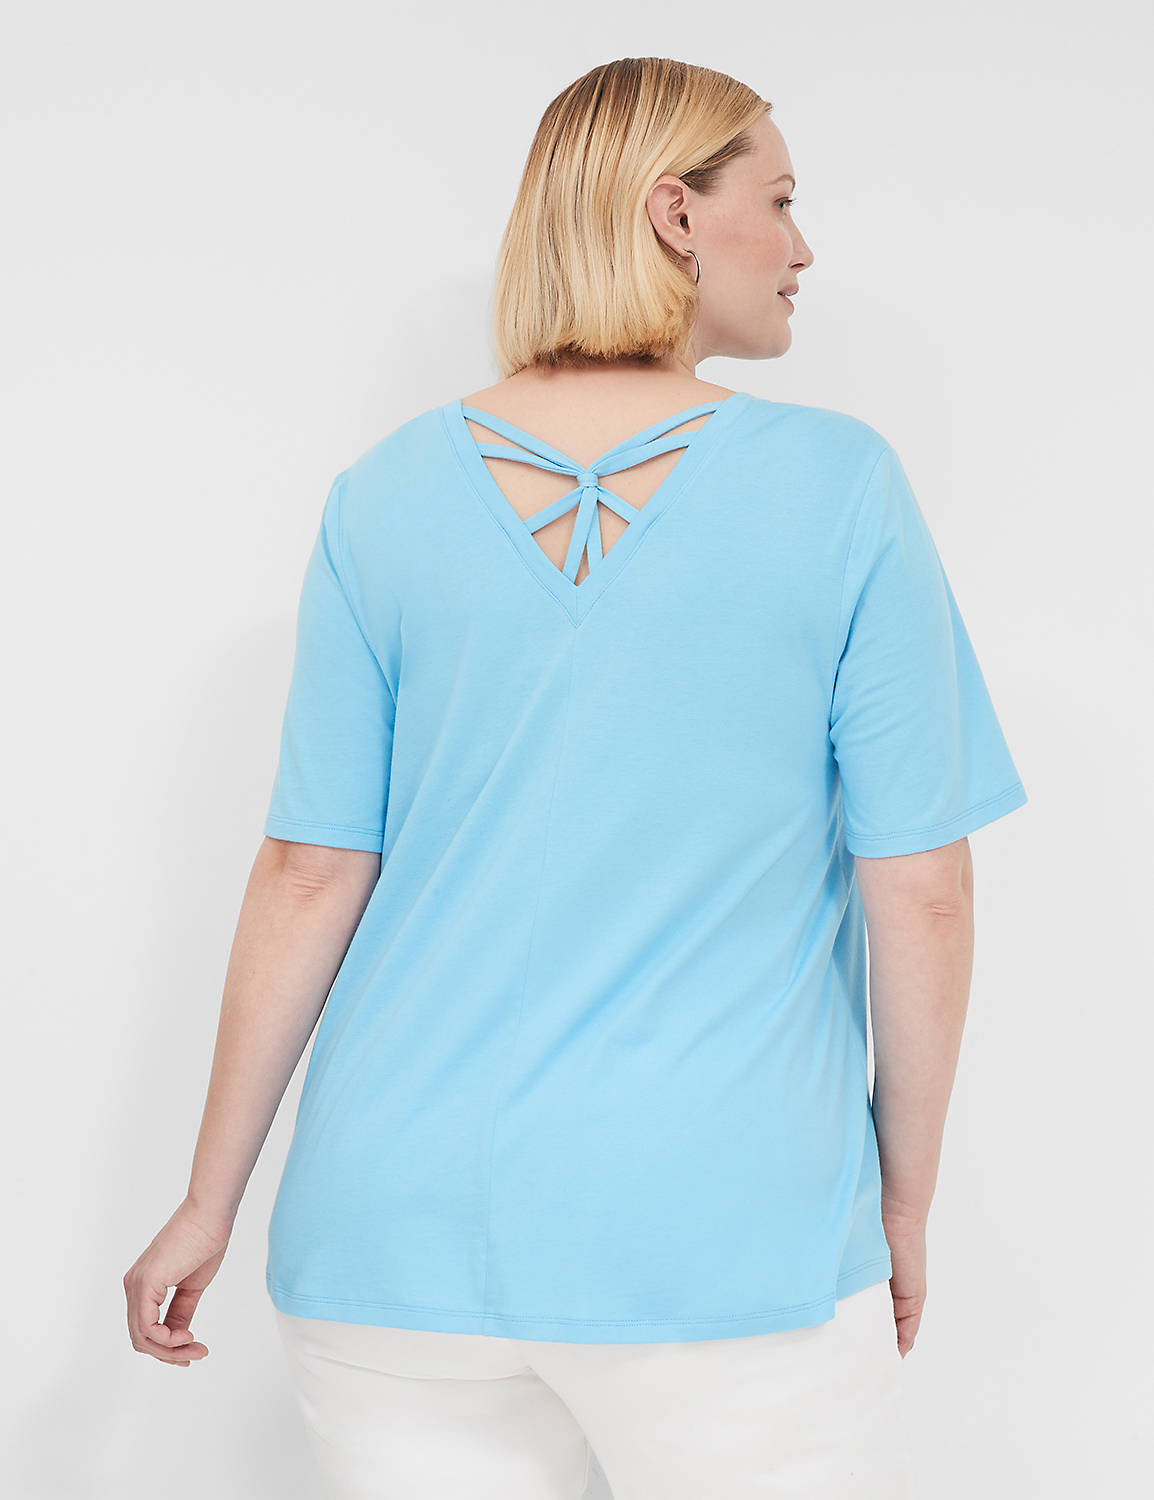 Casual Strappy Back Swing Tee S 114 Product Image 1